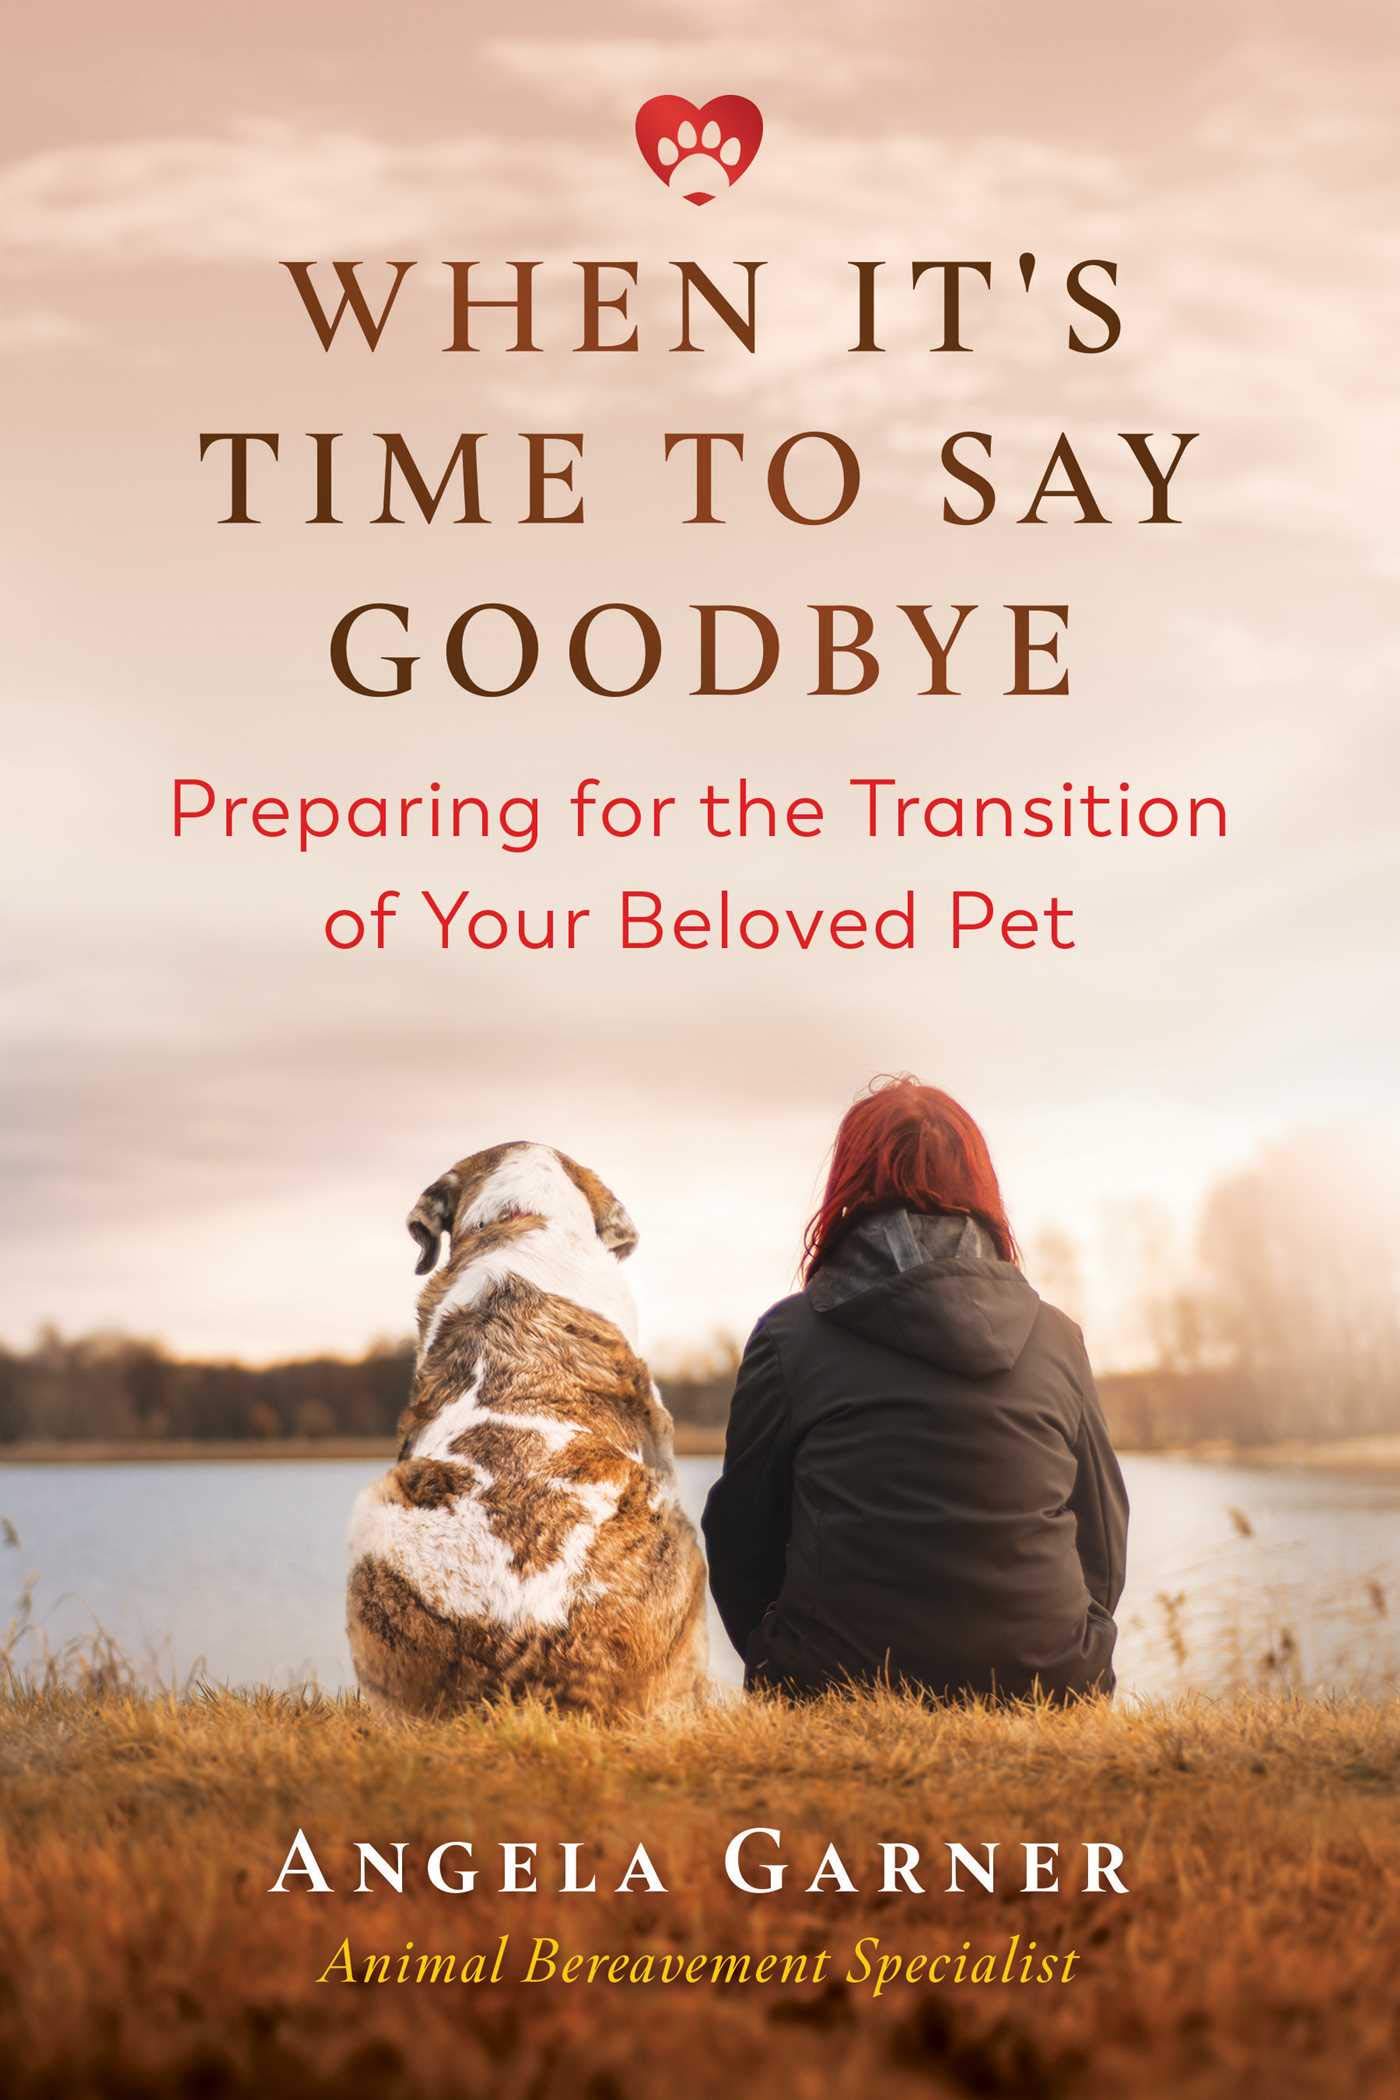 The Best Ways To Say Goodbye To Your Beloved Pet 74396 1 - The Best Ways To Say Goodbye To Your Beloved Pet